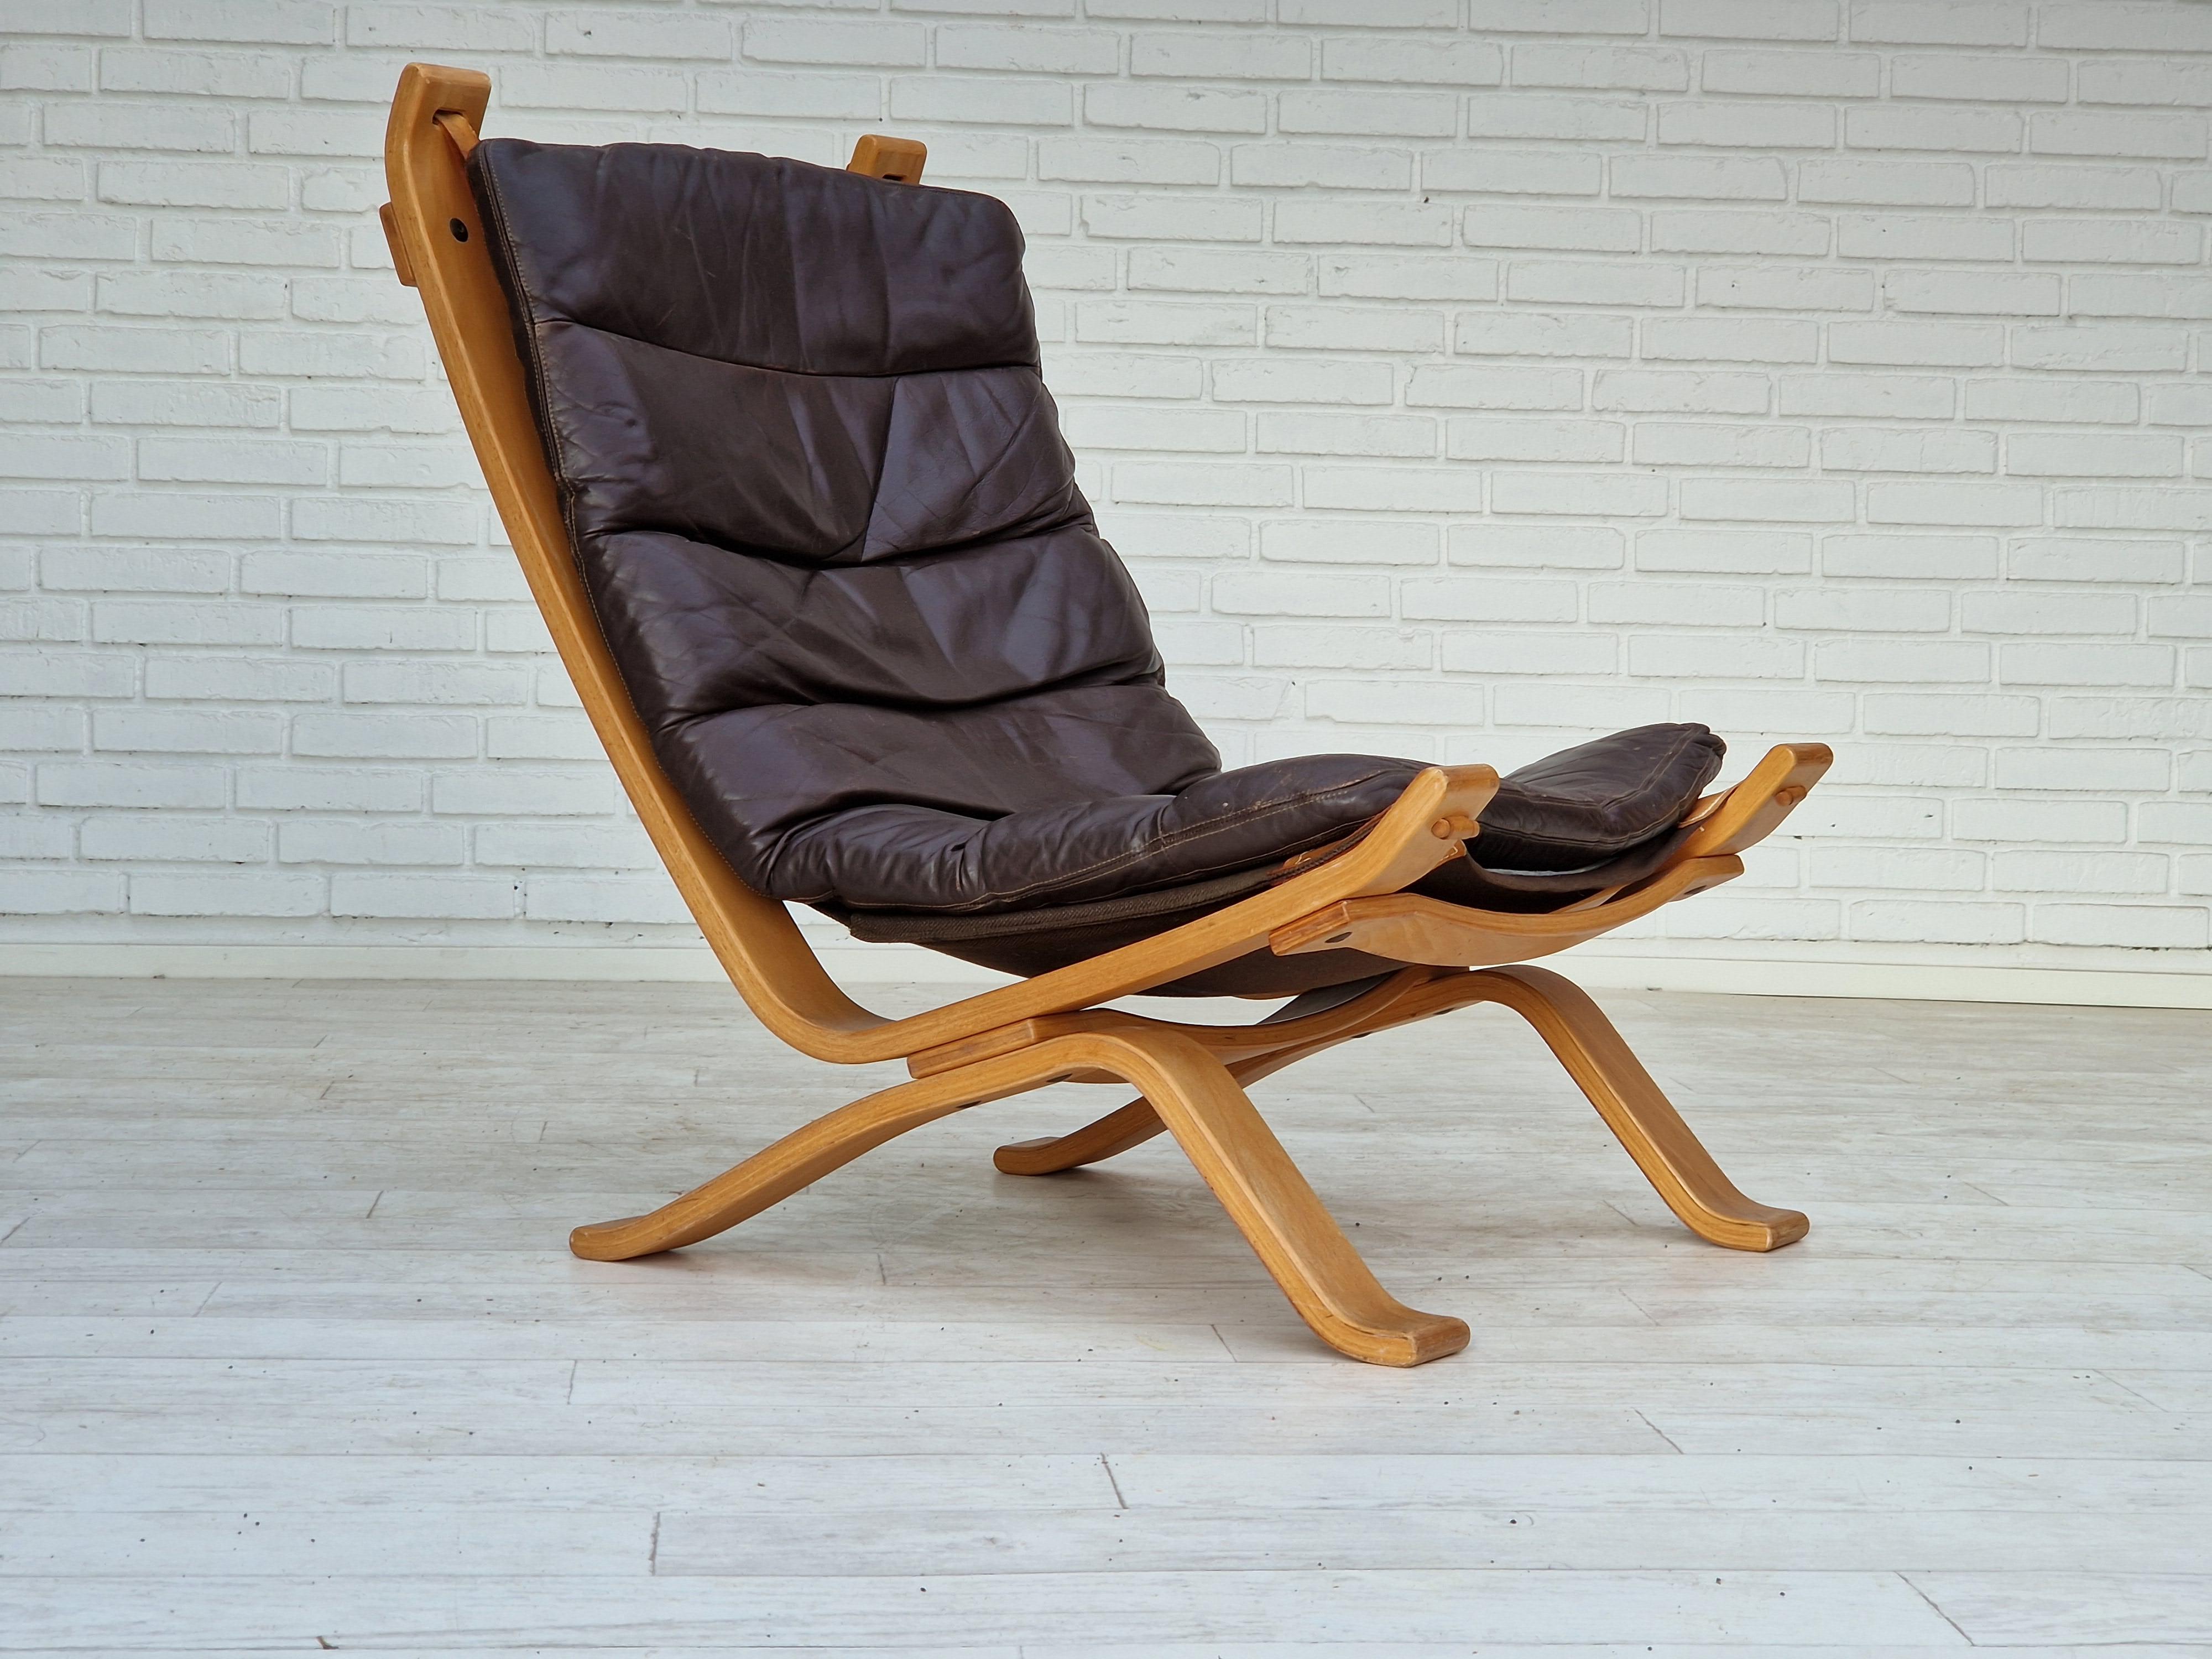 1970s, Danish design by Bramin Møbler. Easy chair in original very good condition: no smells and no stains. Brown leather, bent plywood, canvas. Removable cushion. Manufactured by Danish furnituremaker Bramin Møbler in about 1970.
